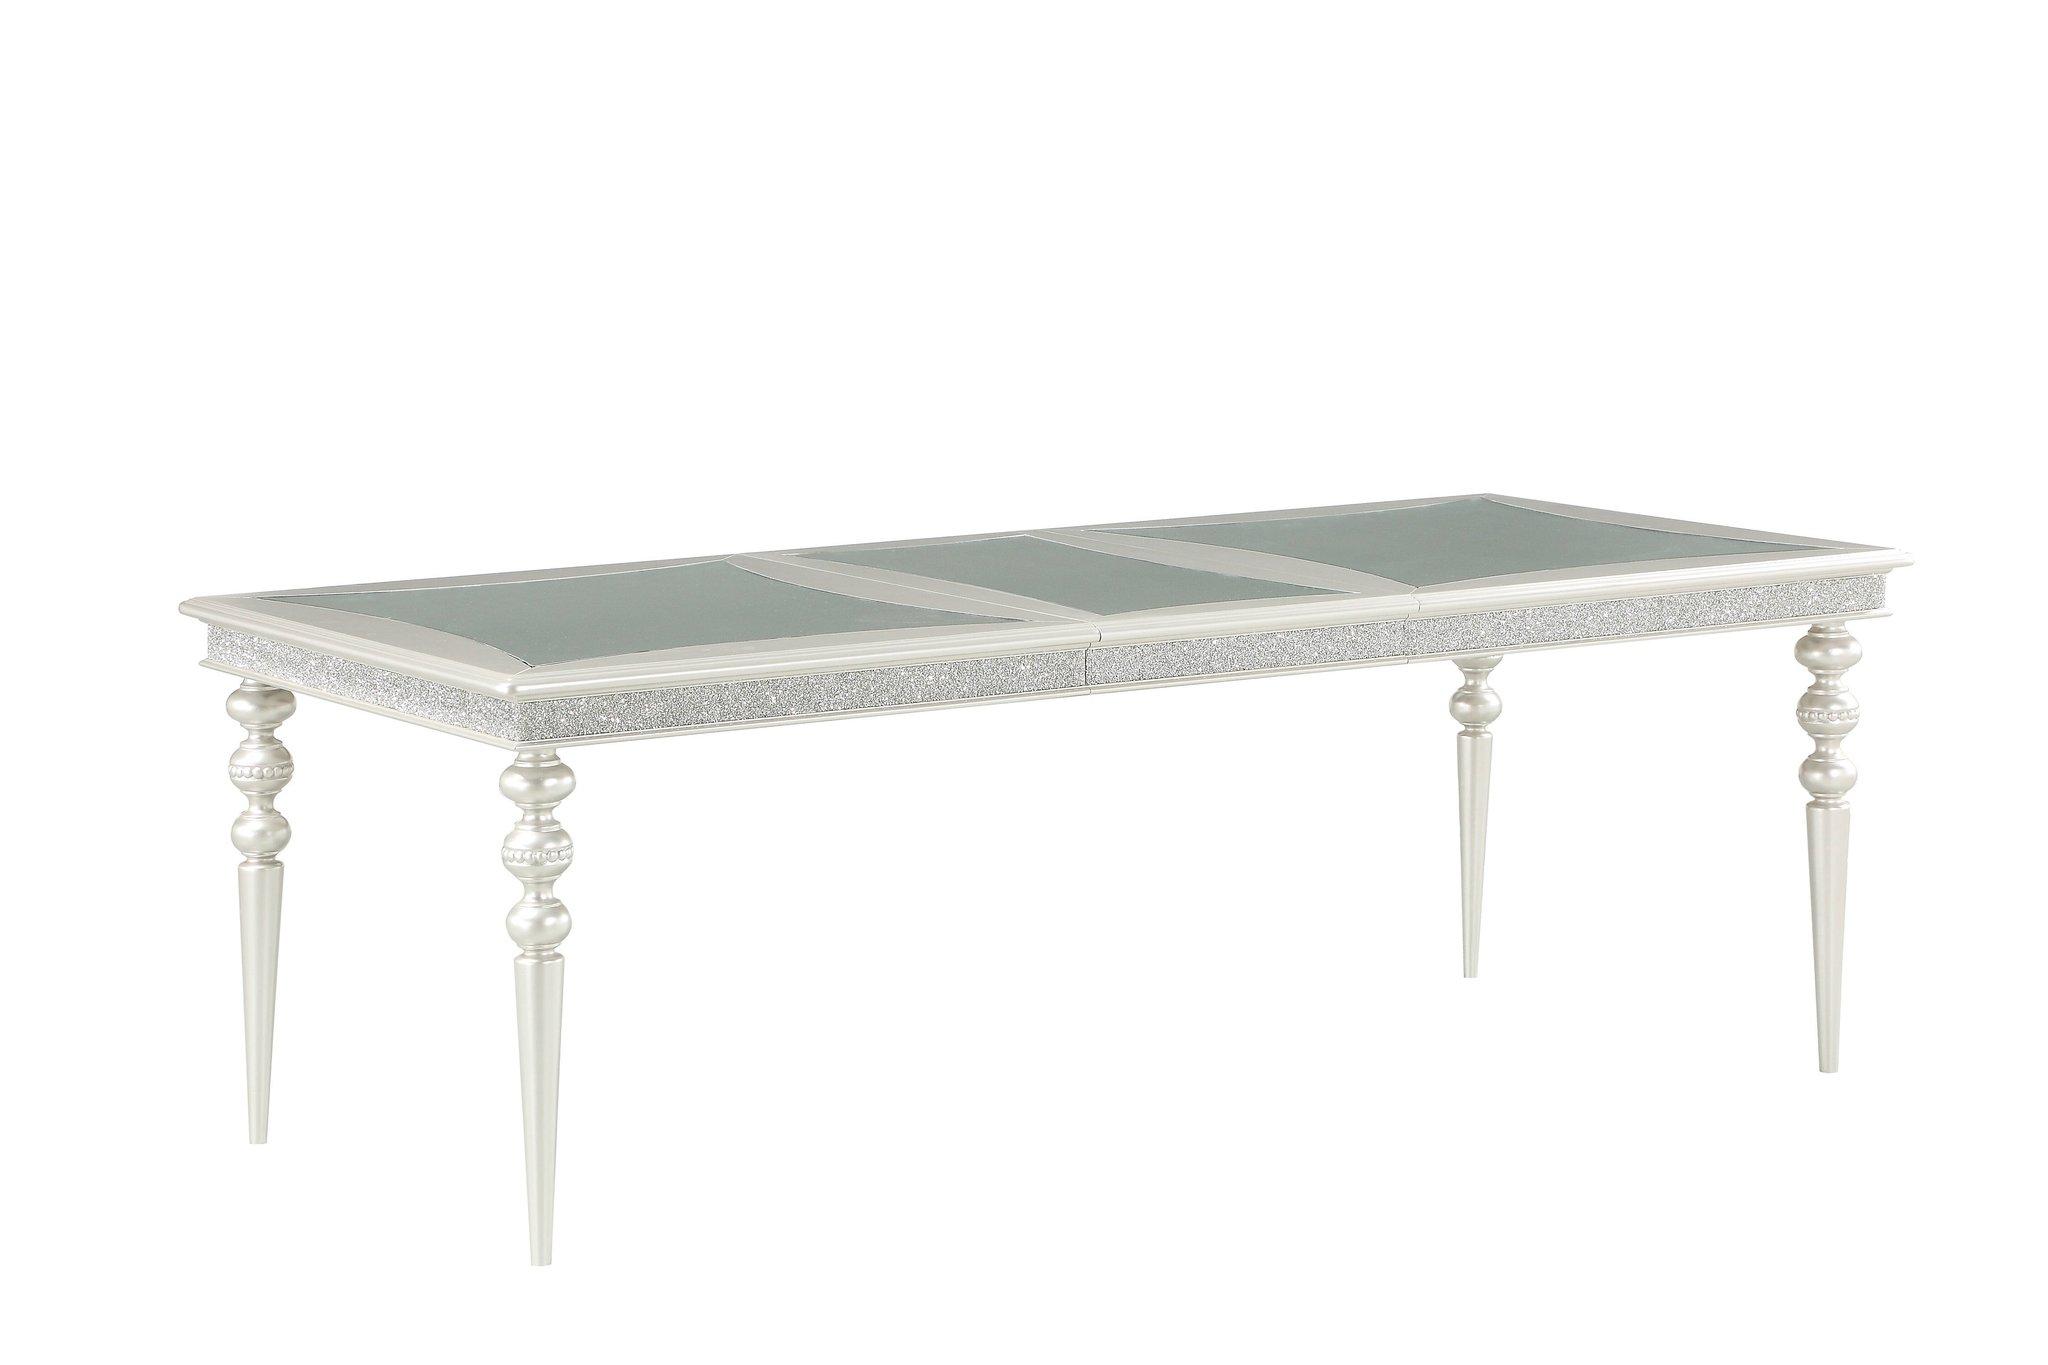 Contemporary Dining Table Maverick 61800 61800 in Platinum Glass